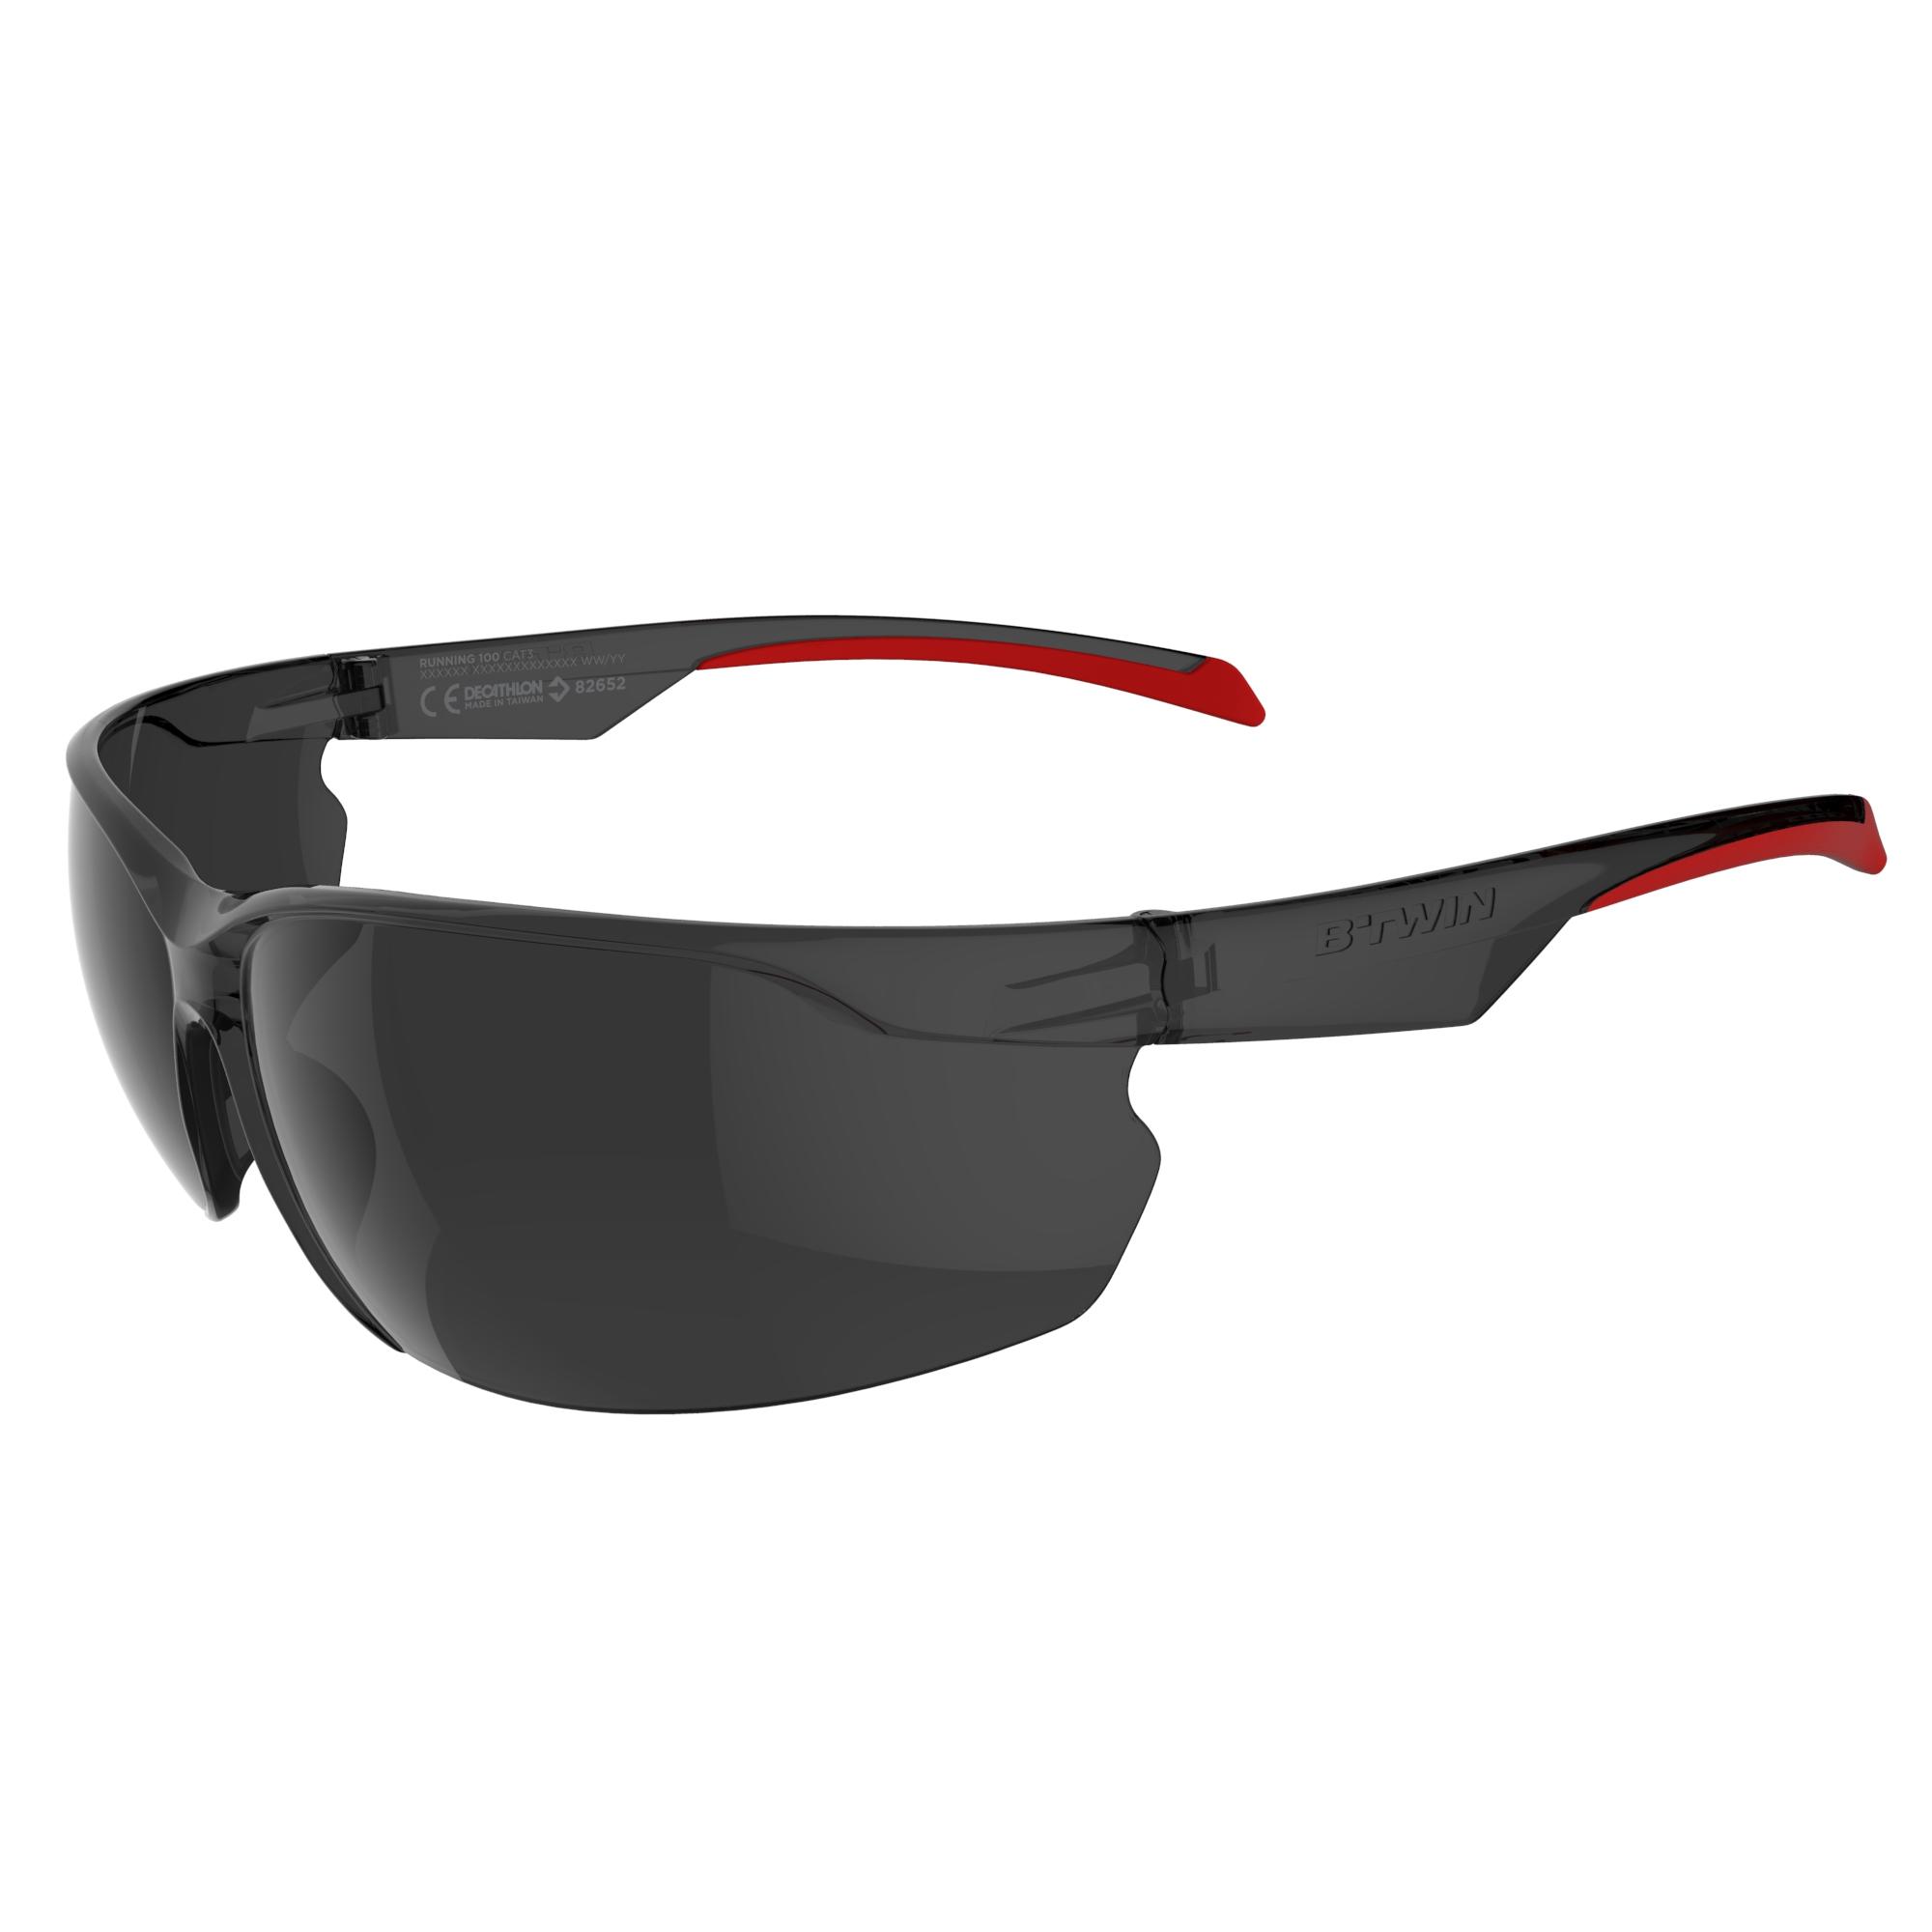 ROCKRIDER ST 100 Category 3 Adult Mountain Biking Sunglasses - Grey and Red